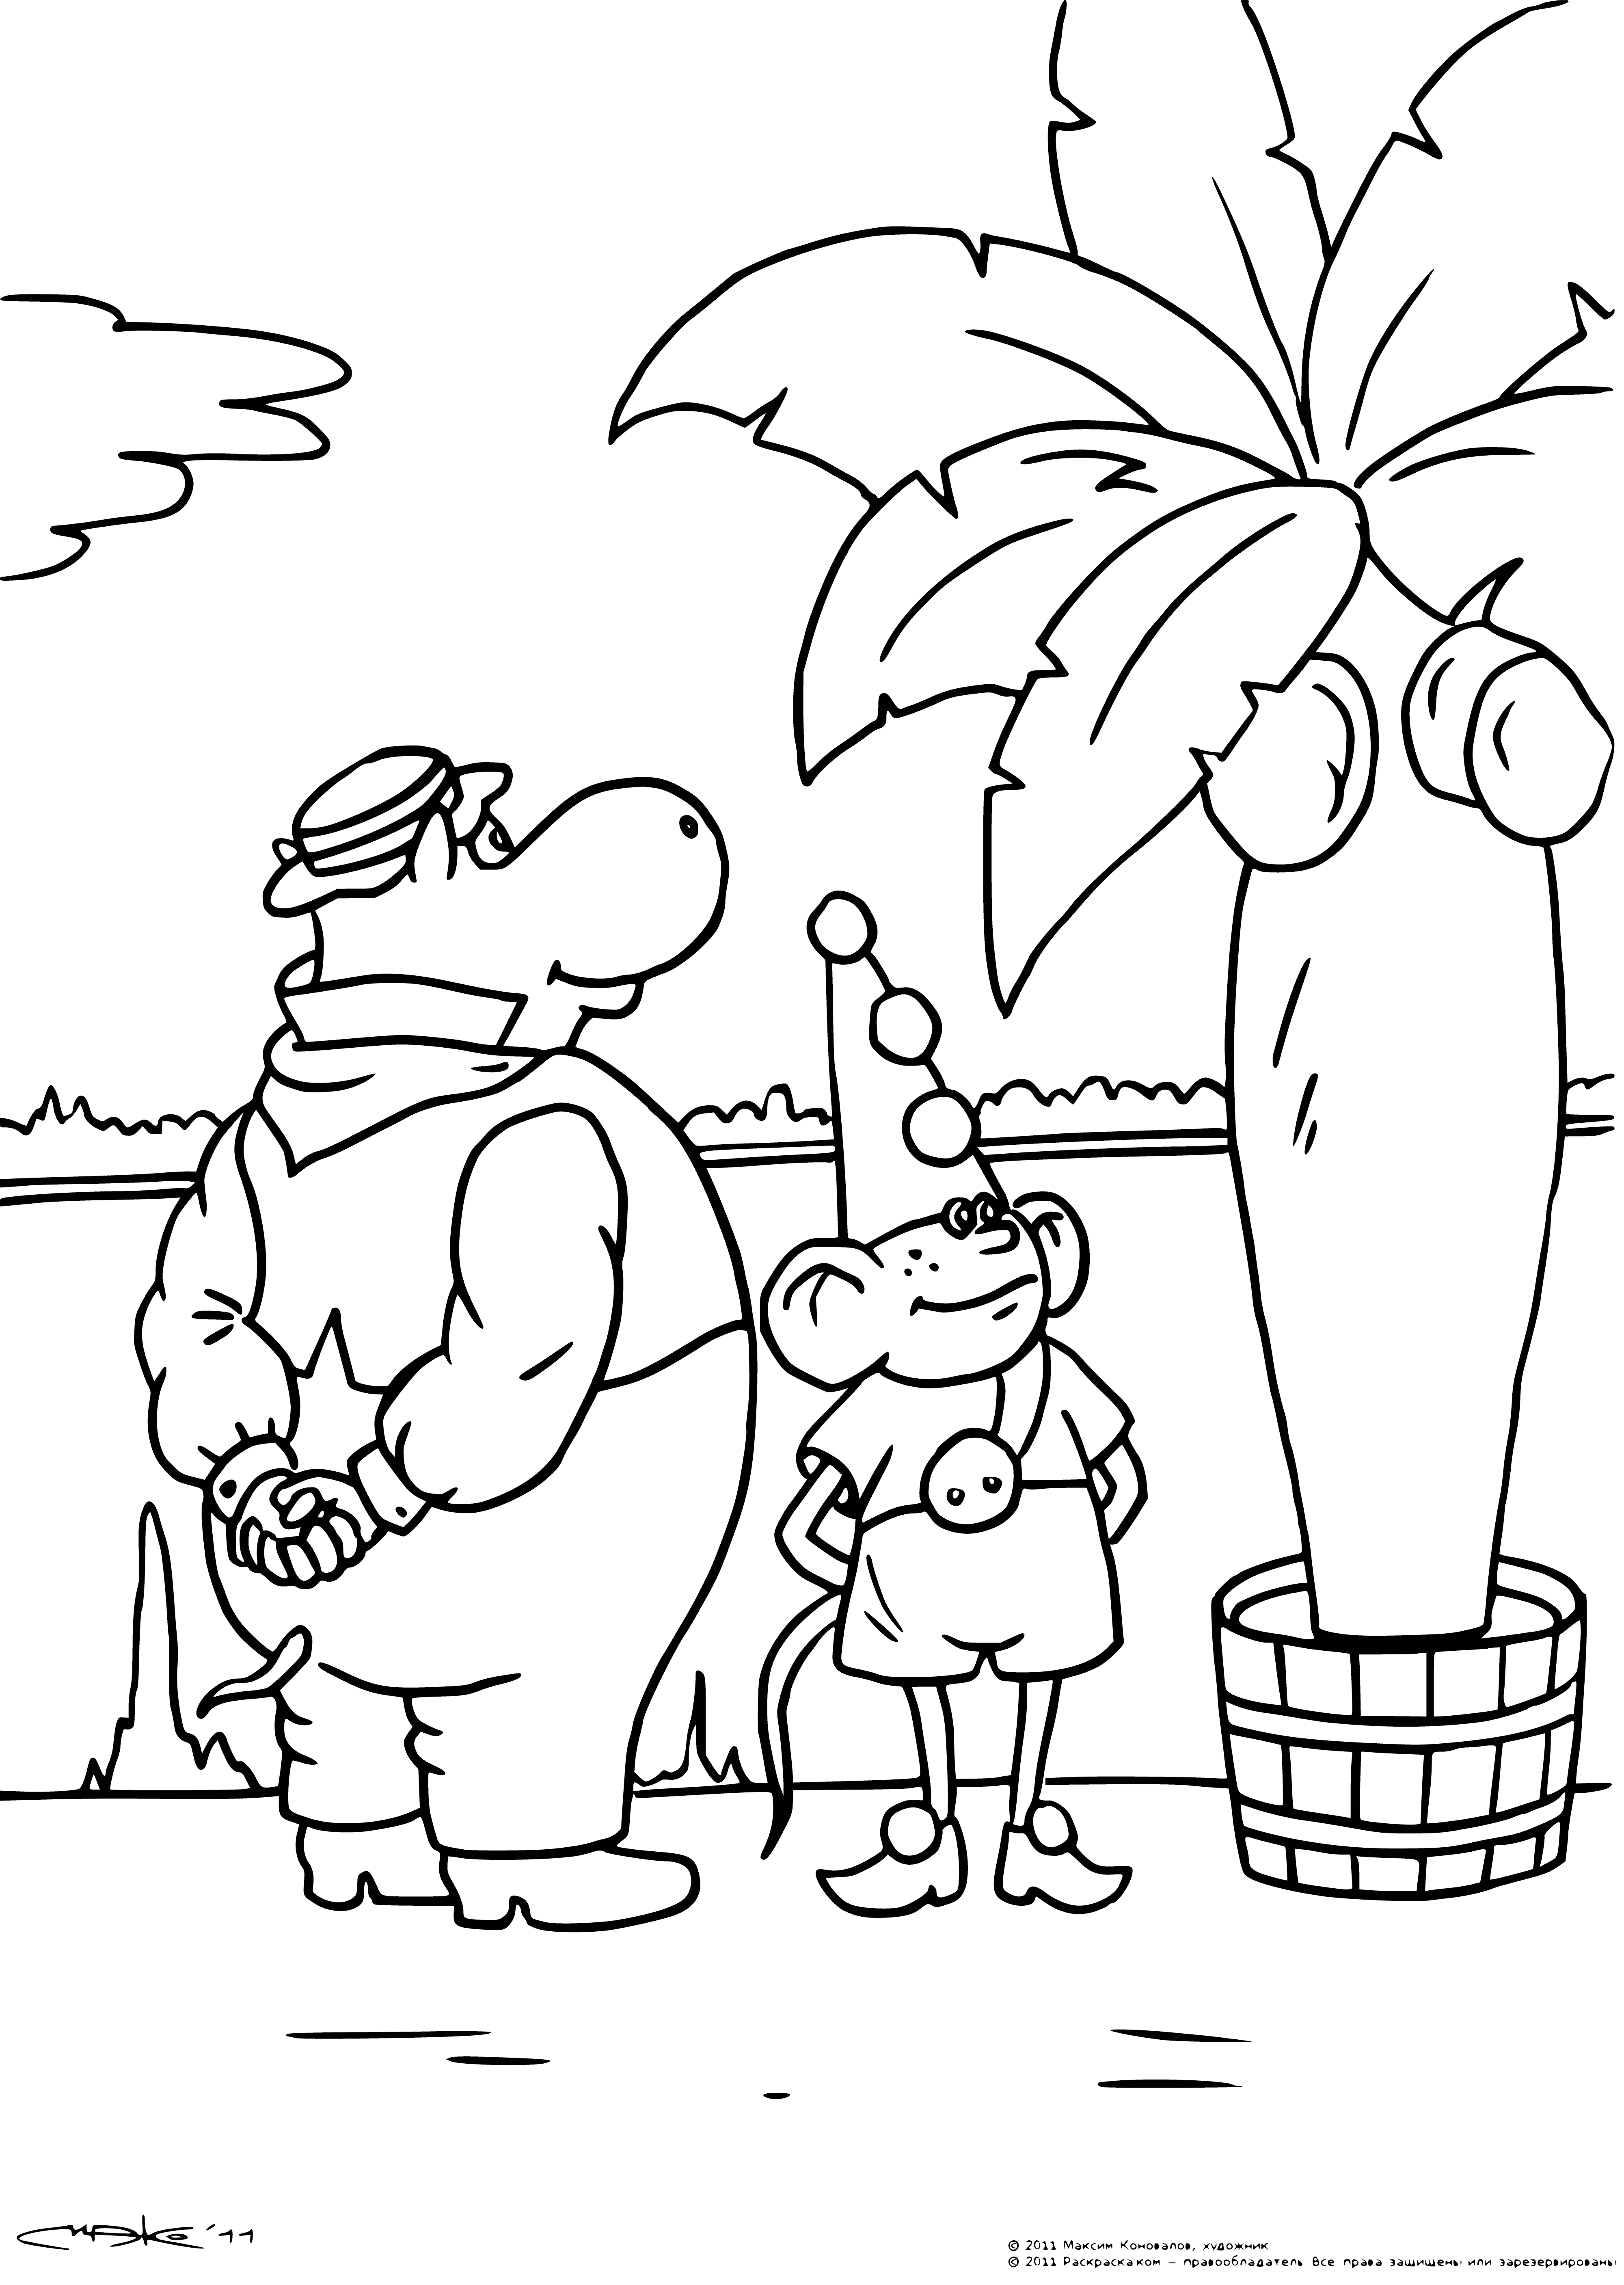 coloring page: Funtik plays with melted chocolate, trying to eat it.